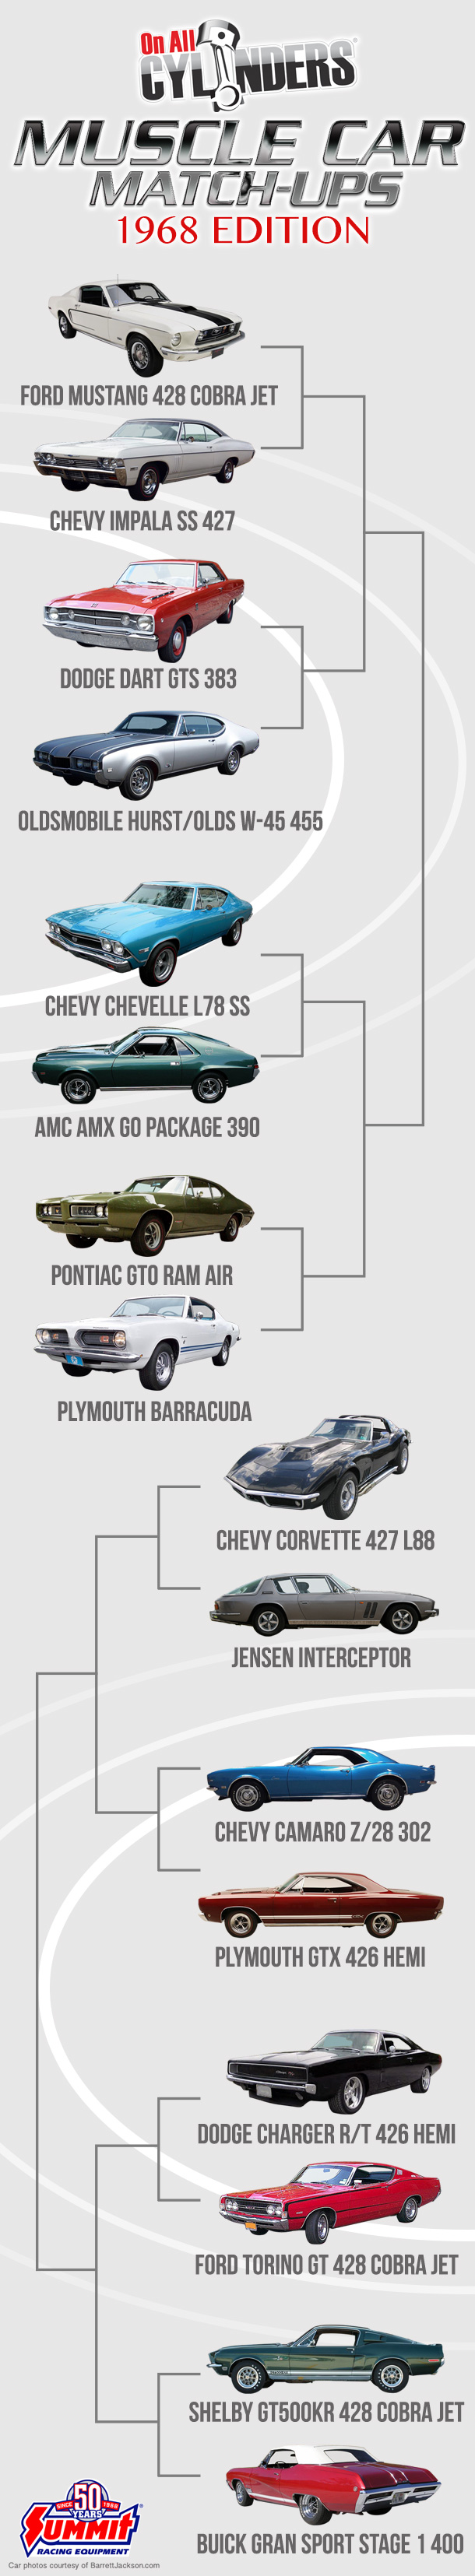 2018 Muscle Car Match-Up Bracket - 1968 Edition